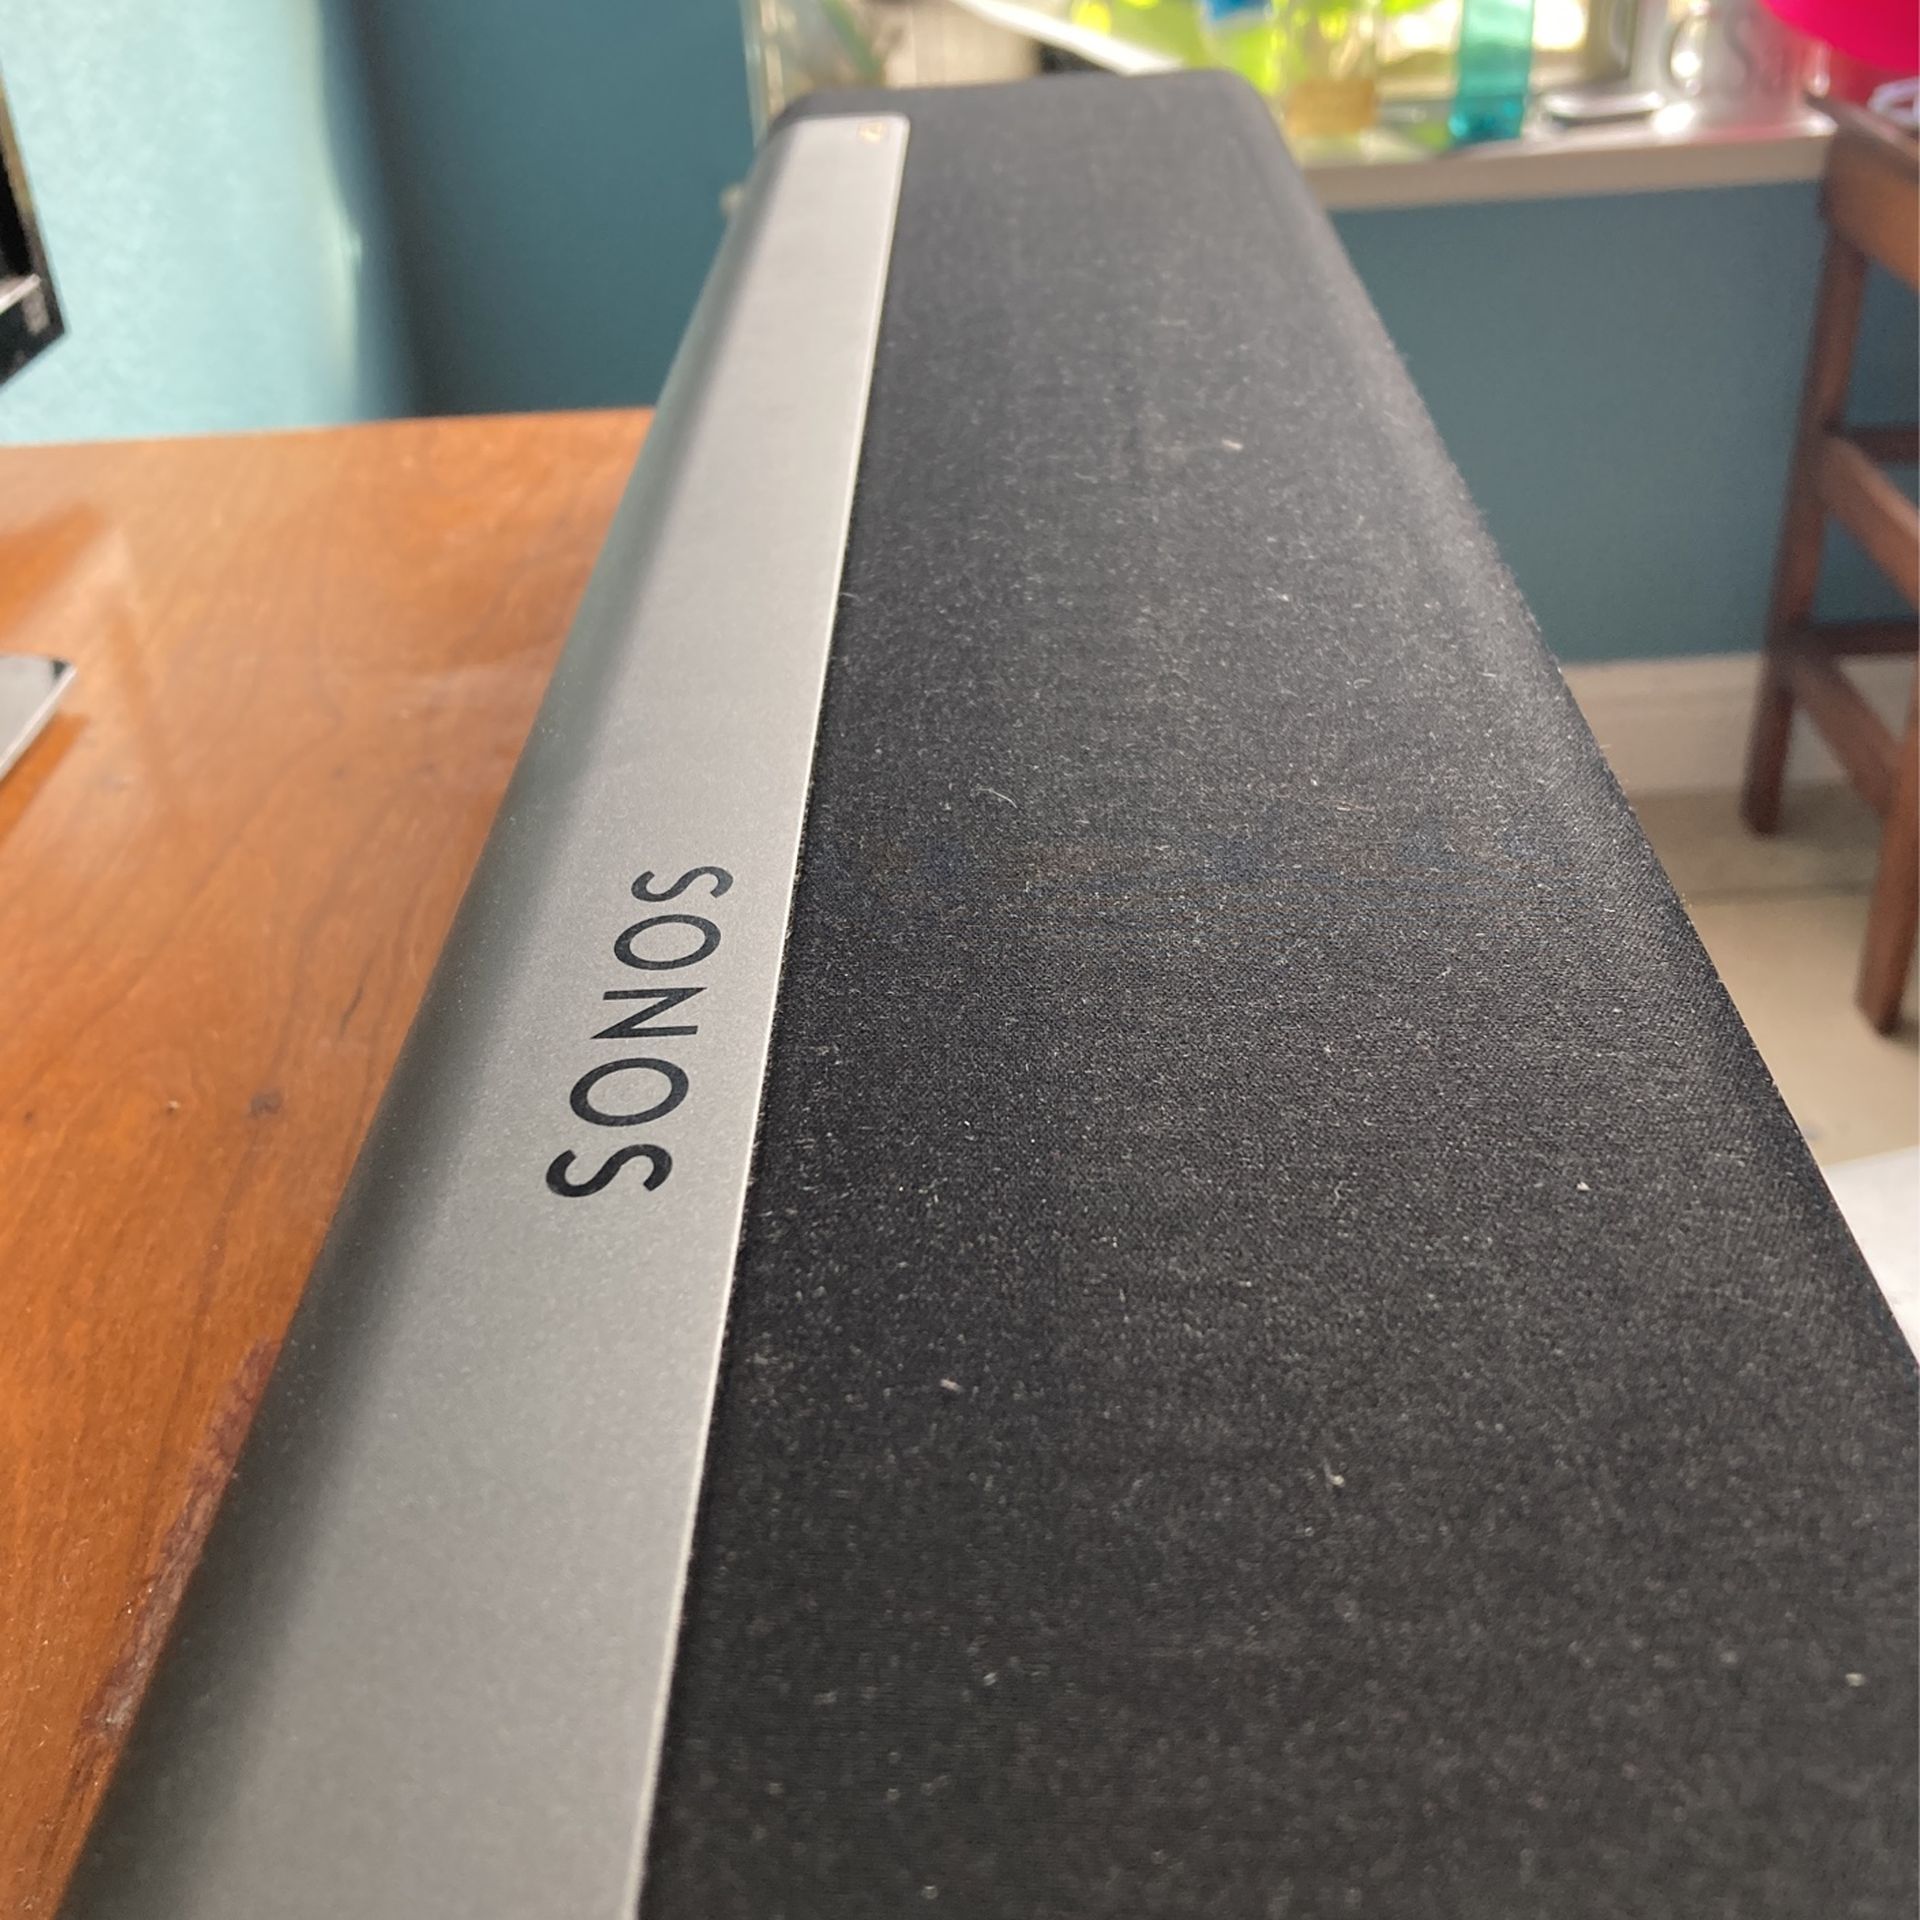 SONOS PLAYBAR, Great Bass for Home Theater